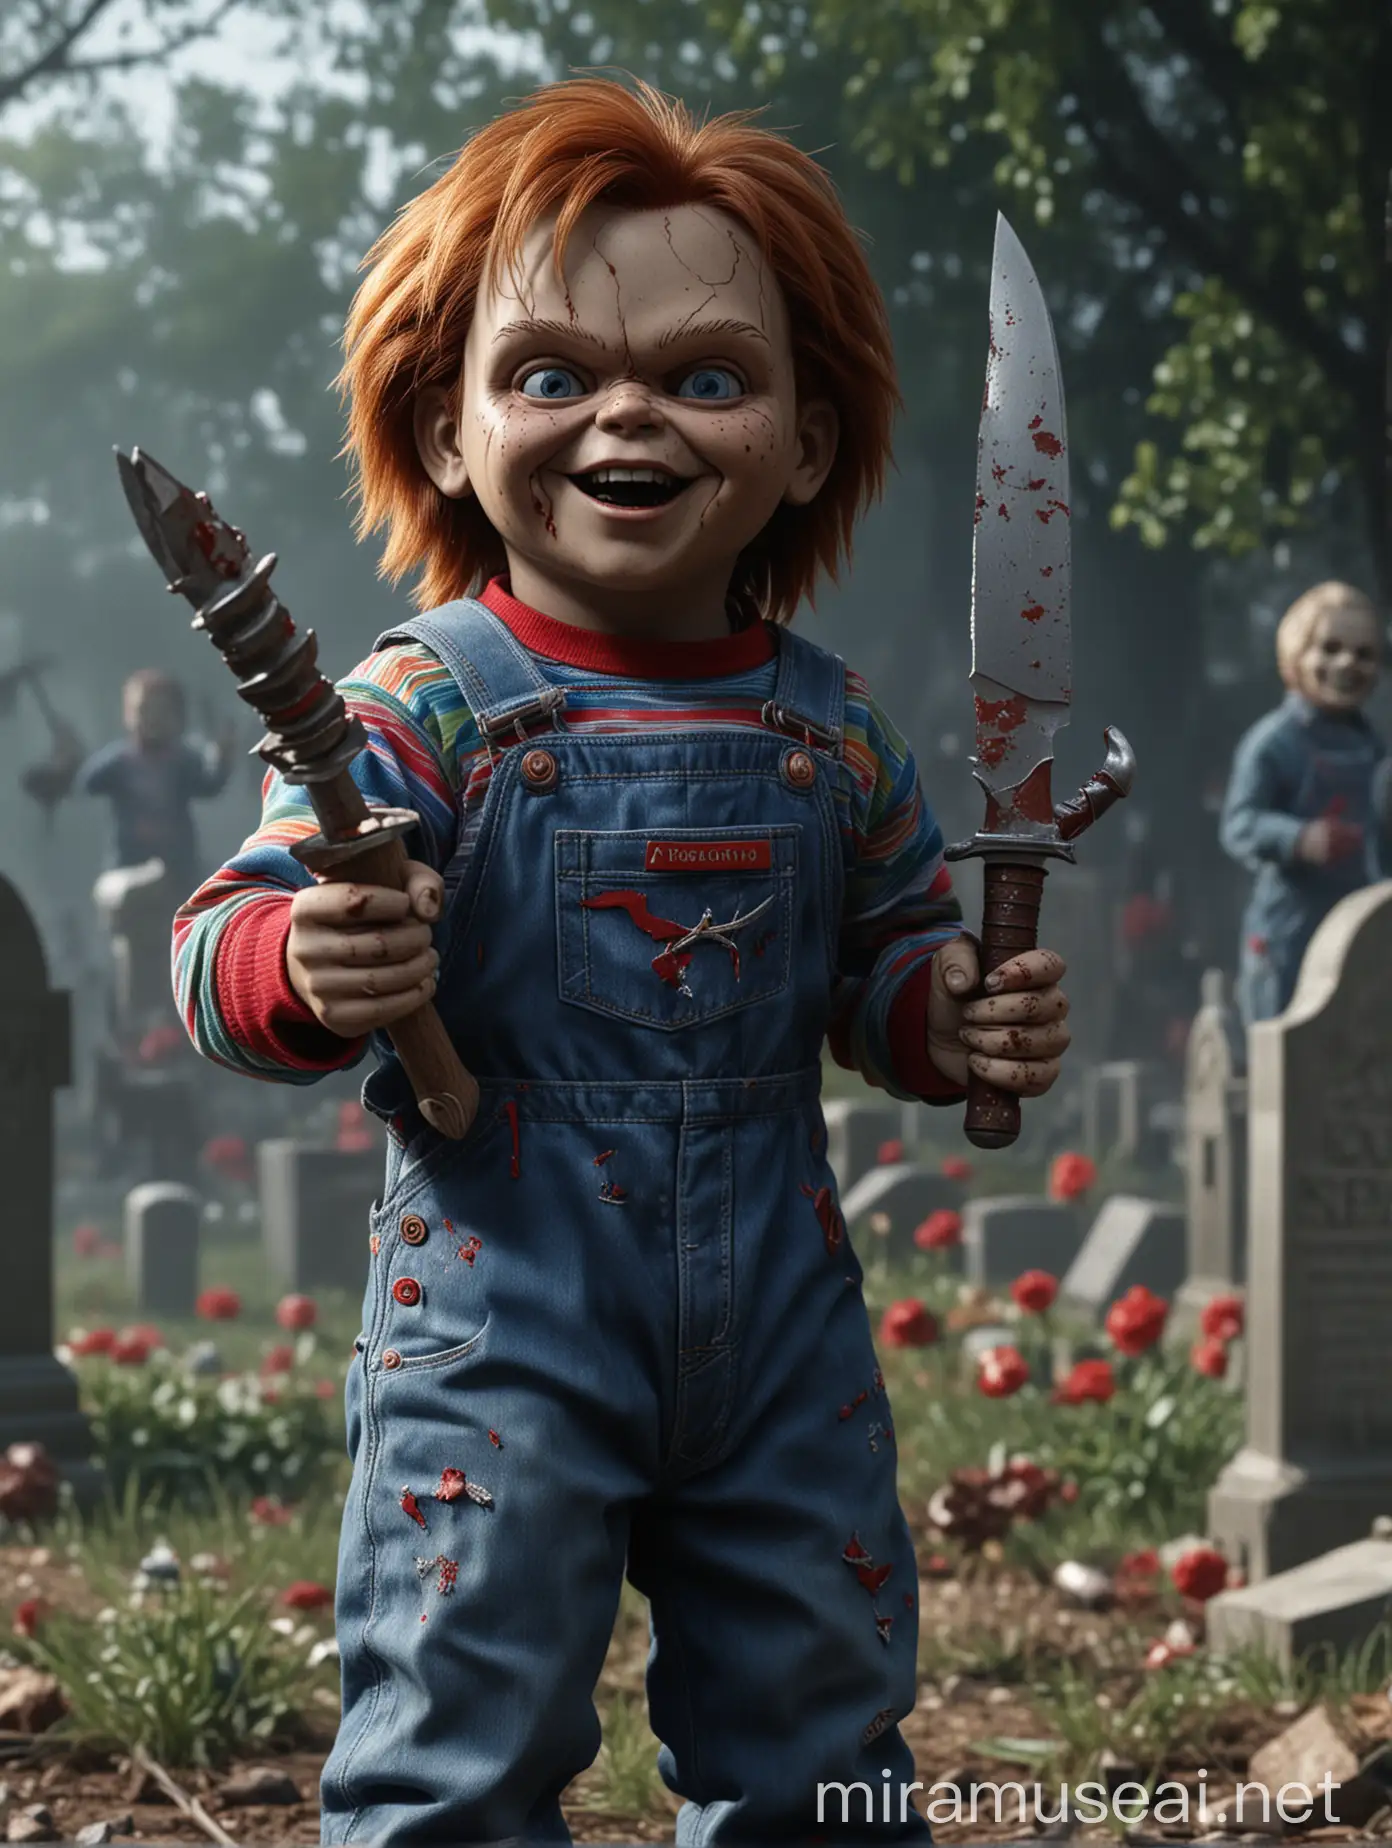 Chucky from Childs Play Standing in Graveyard with Amulet and Knife